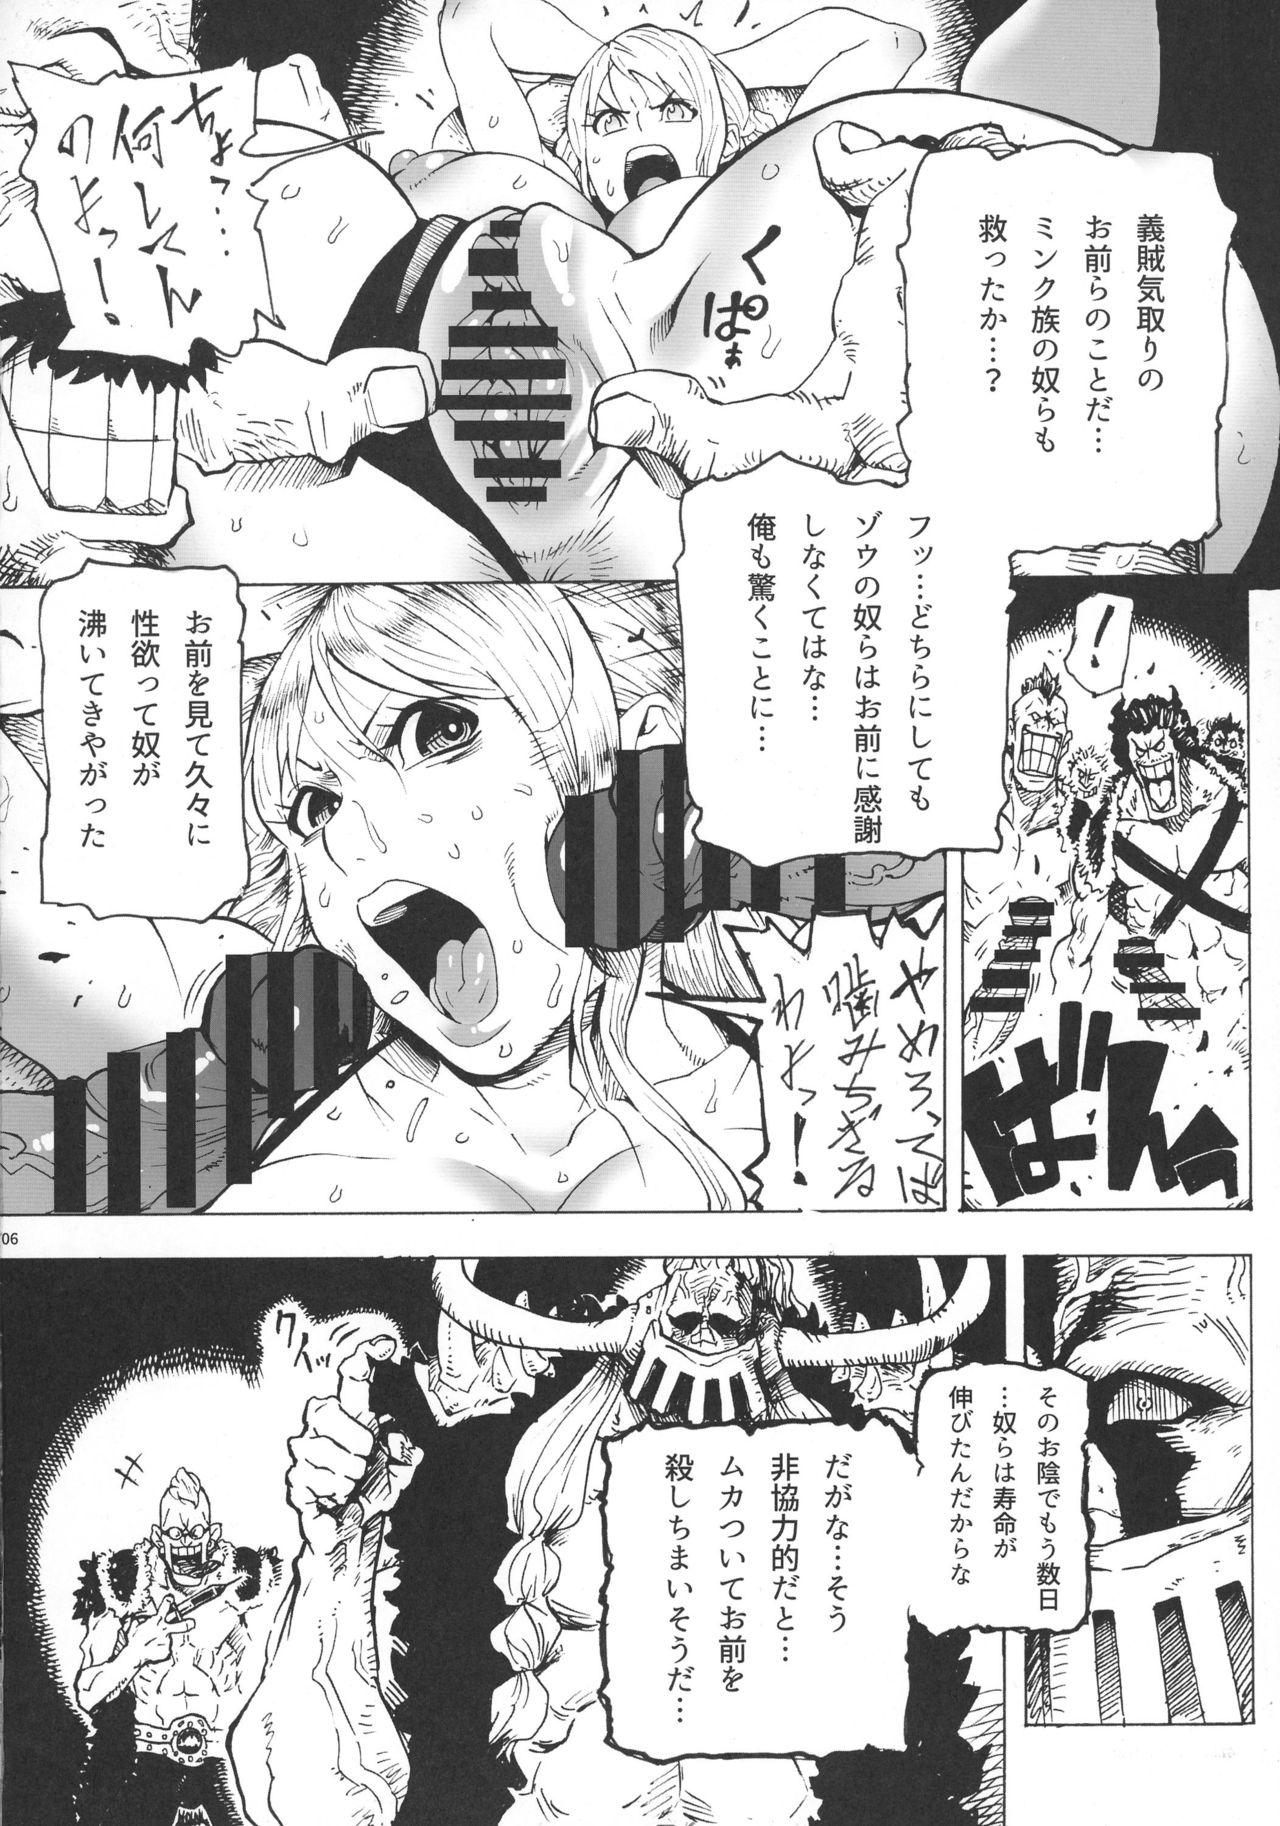 Workout P.O.M Another Episode "J.A.C.K" - One piece Ball Busting - Page 8